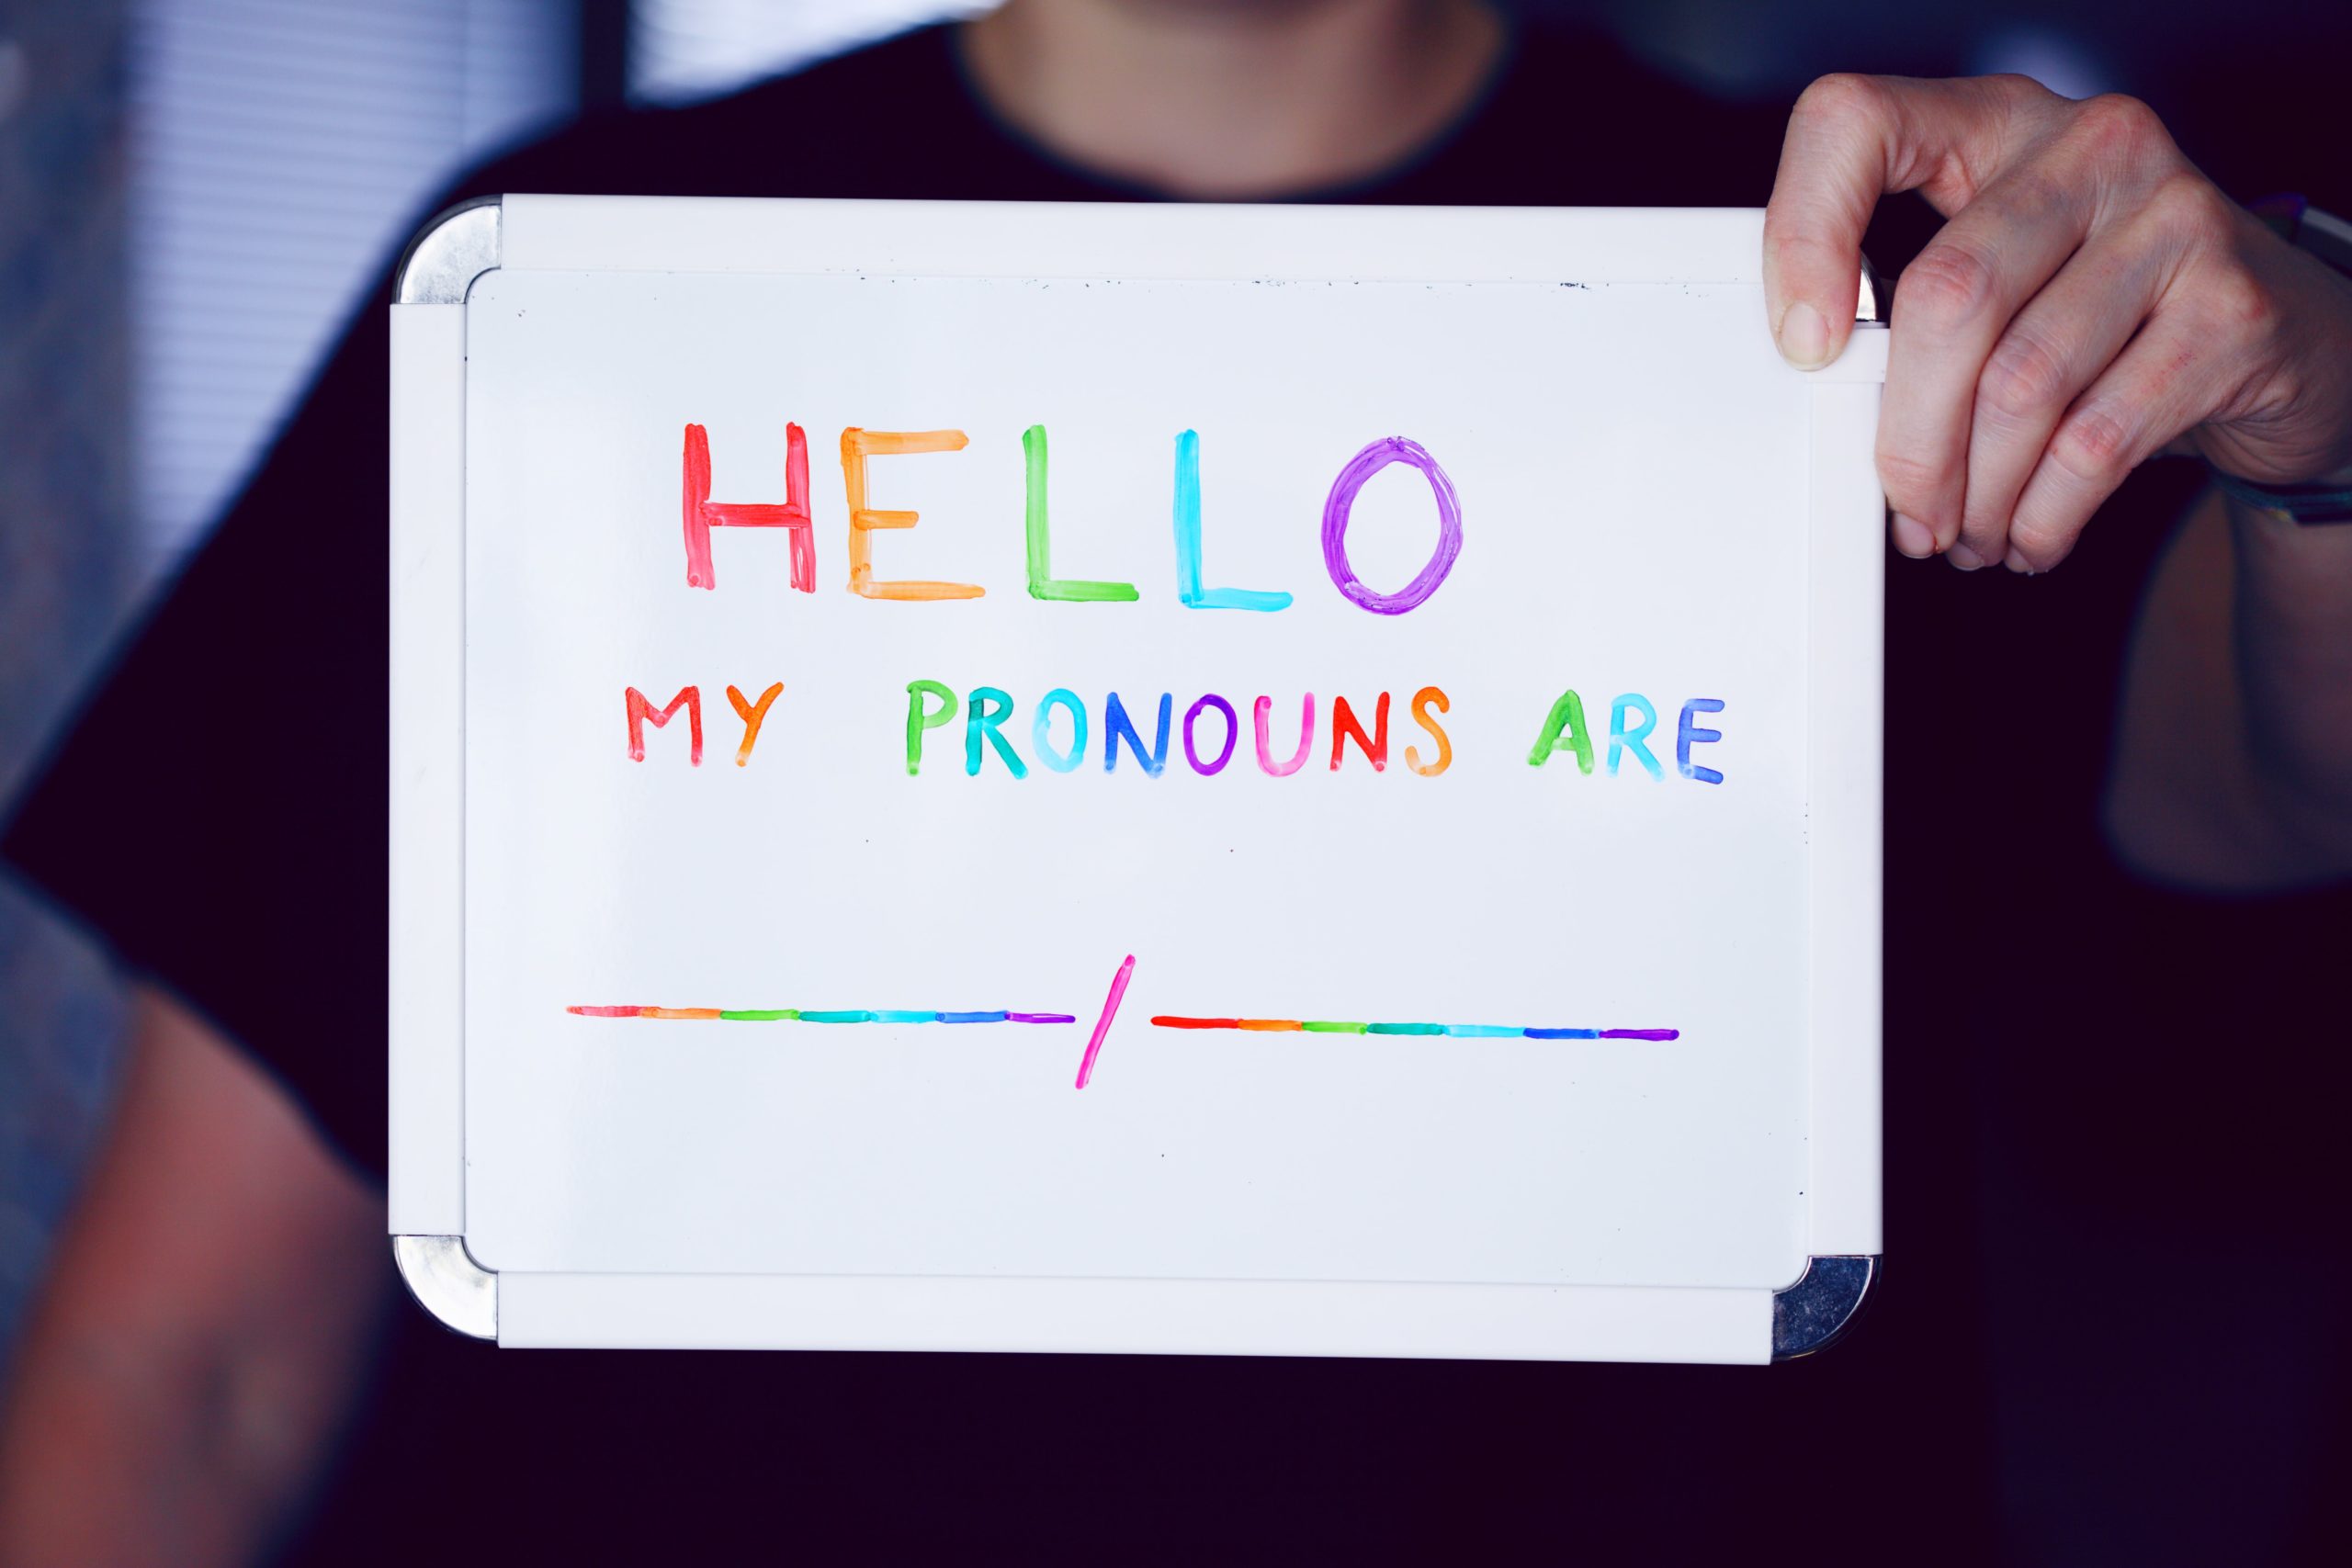 white board sign that says "Hello, my pronouns are"